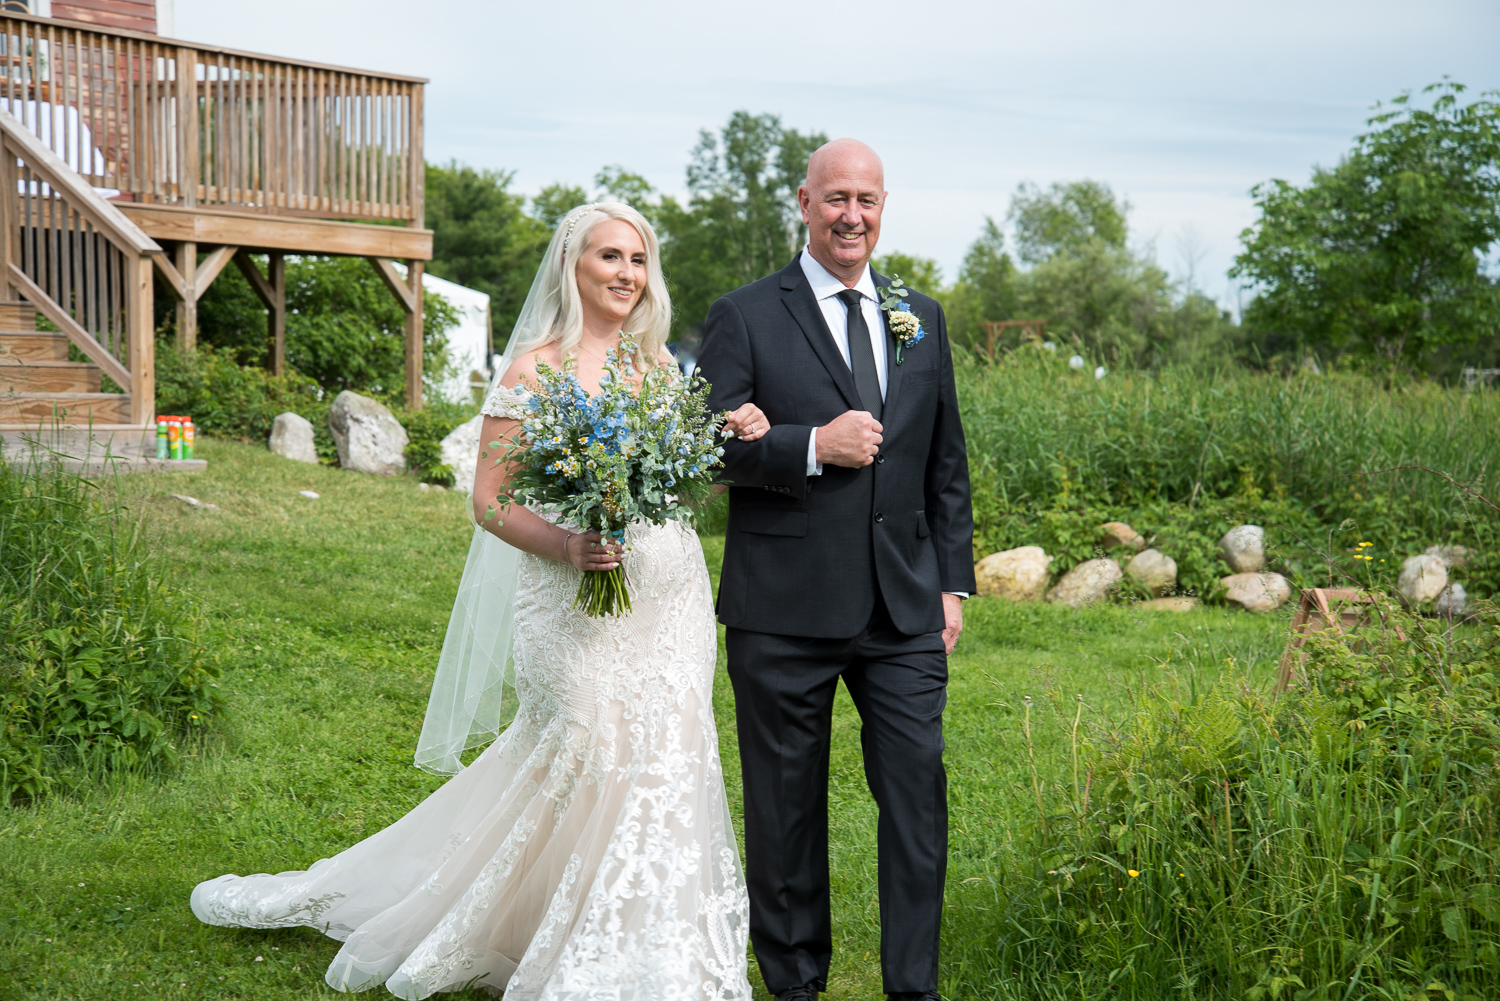 bride and her dad walking down the aisle at the perfect wedding day at Whitney Farm Estate